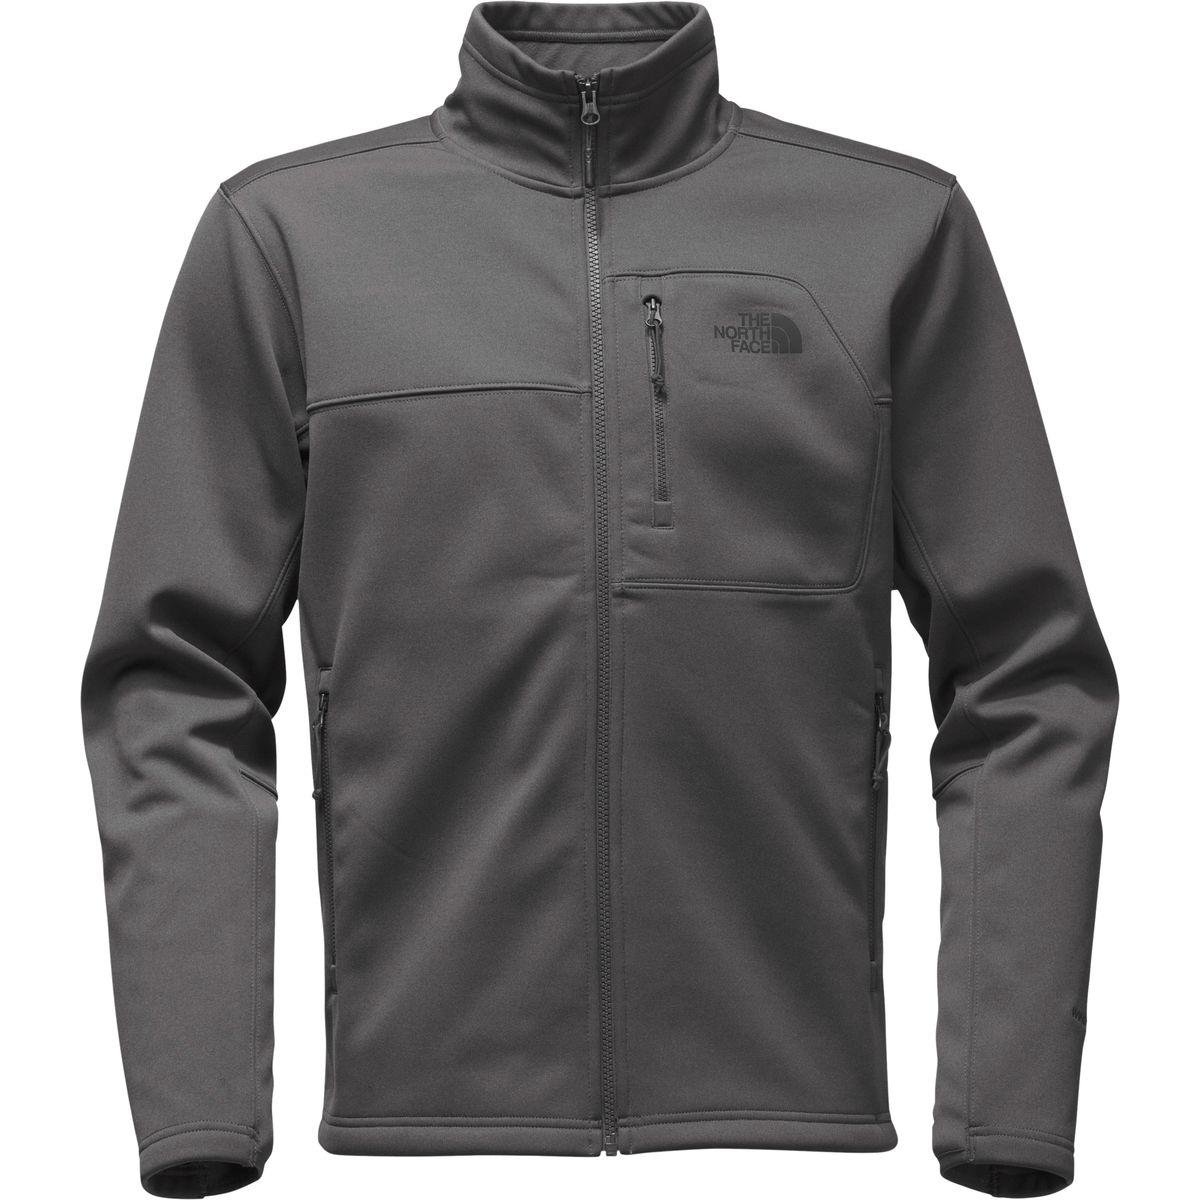 The North Face Synthetic Apex Risor Softshell Jacket in Gray for Men - Lyst